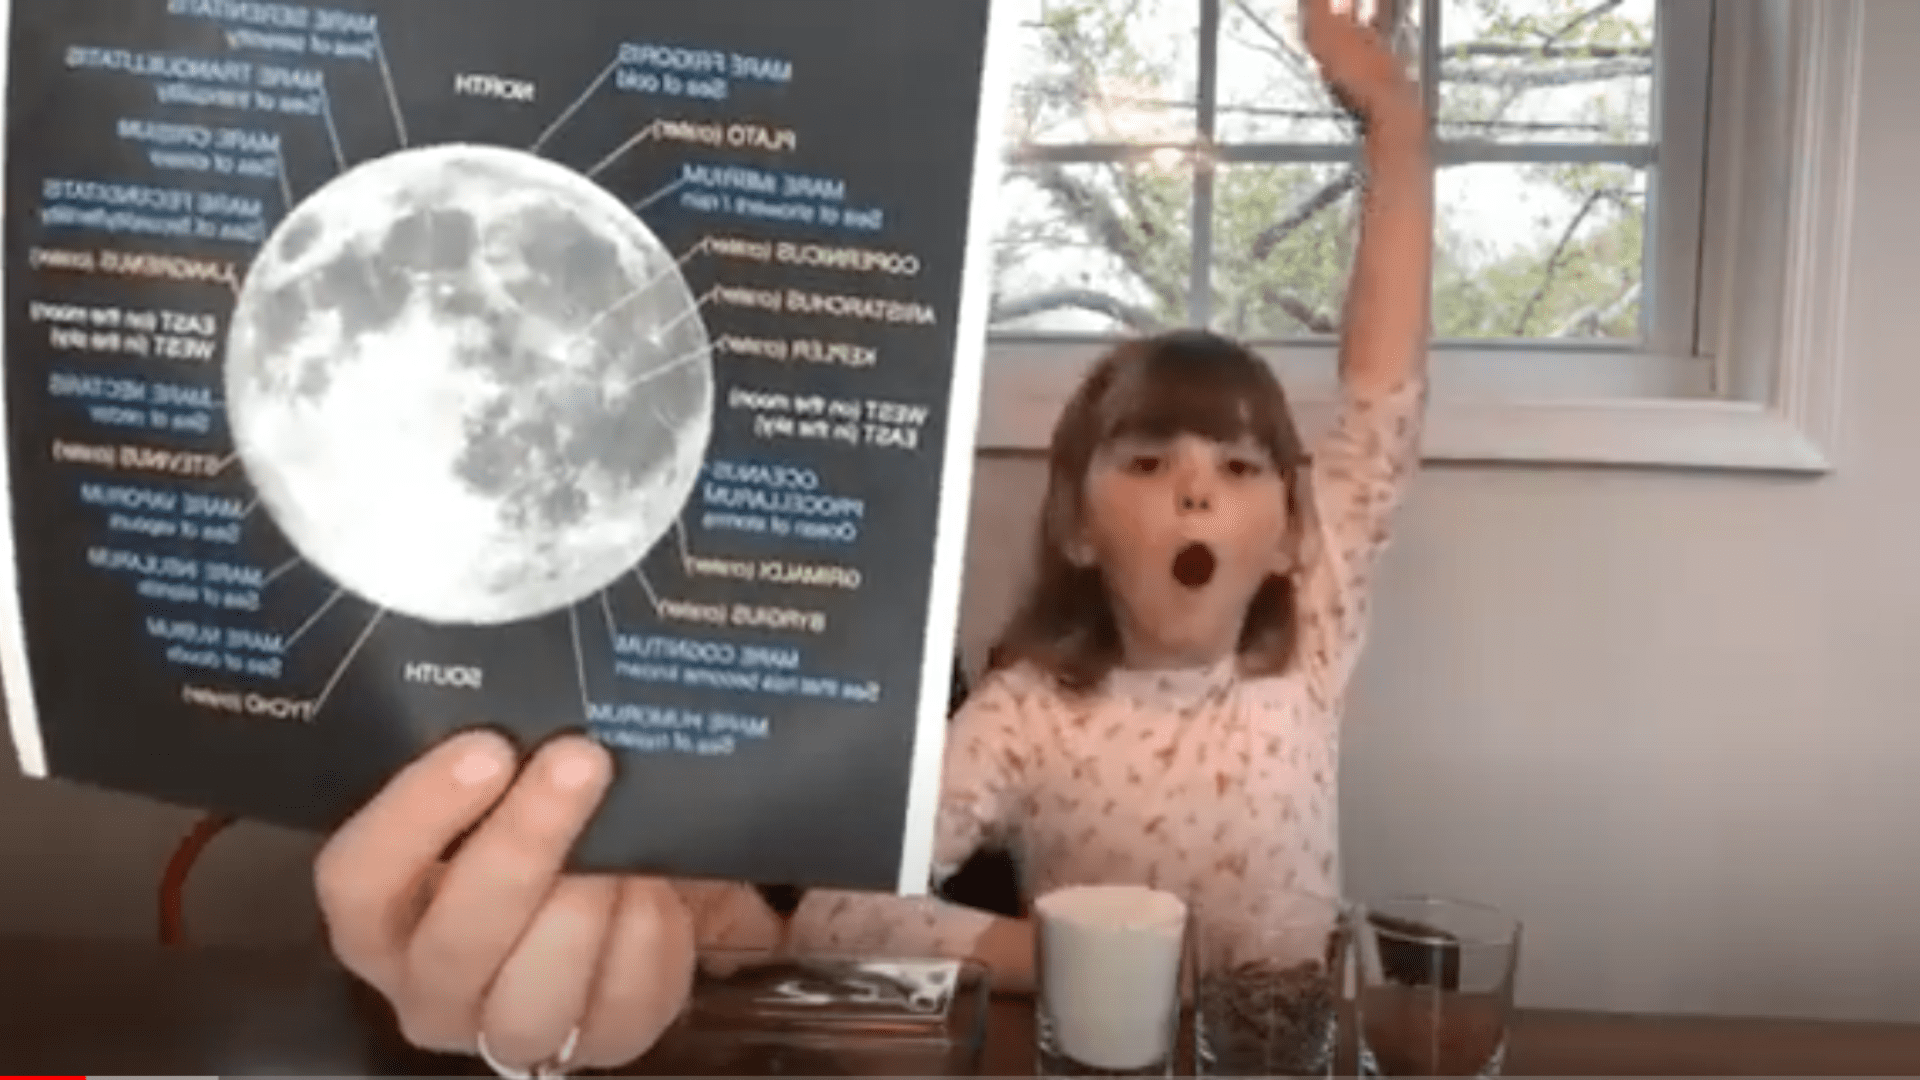 Moon Craters image held up for an excited child